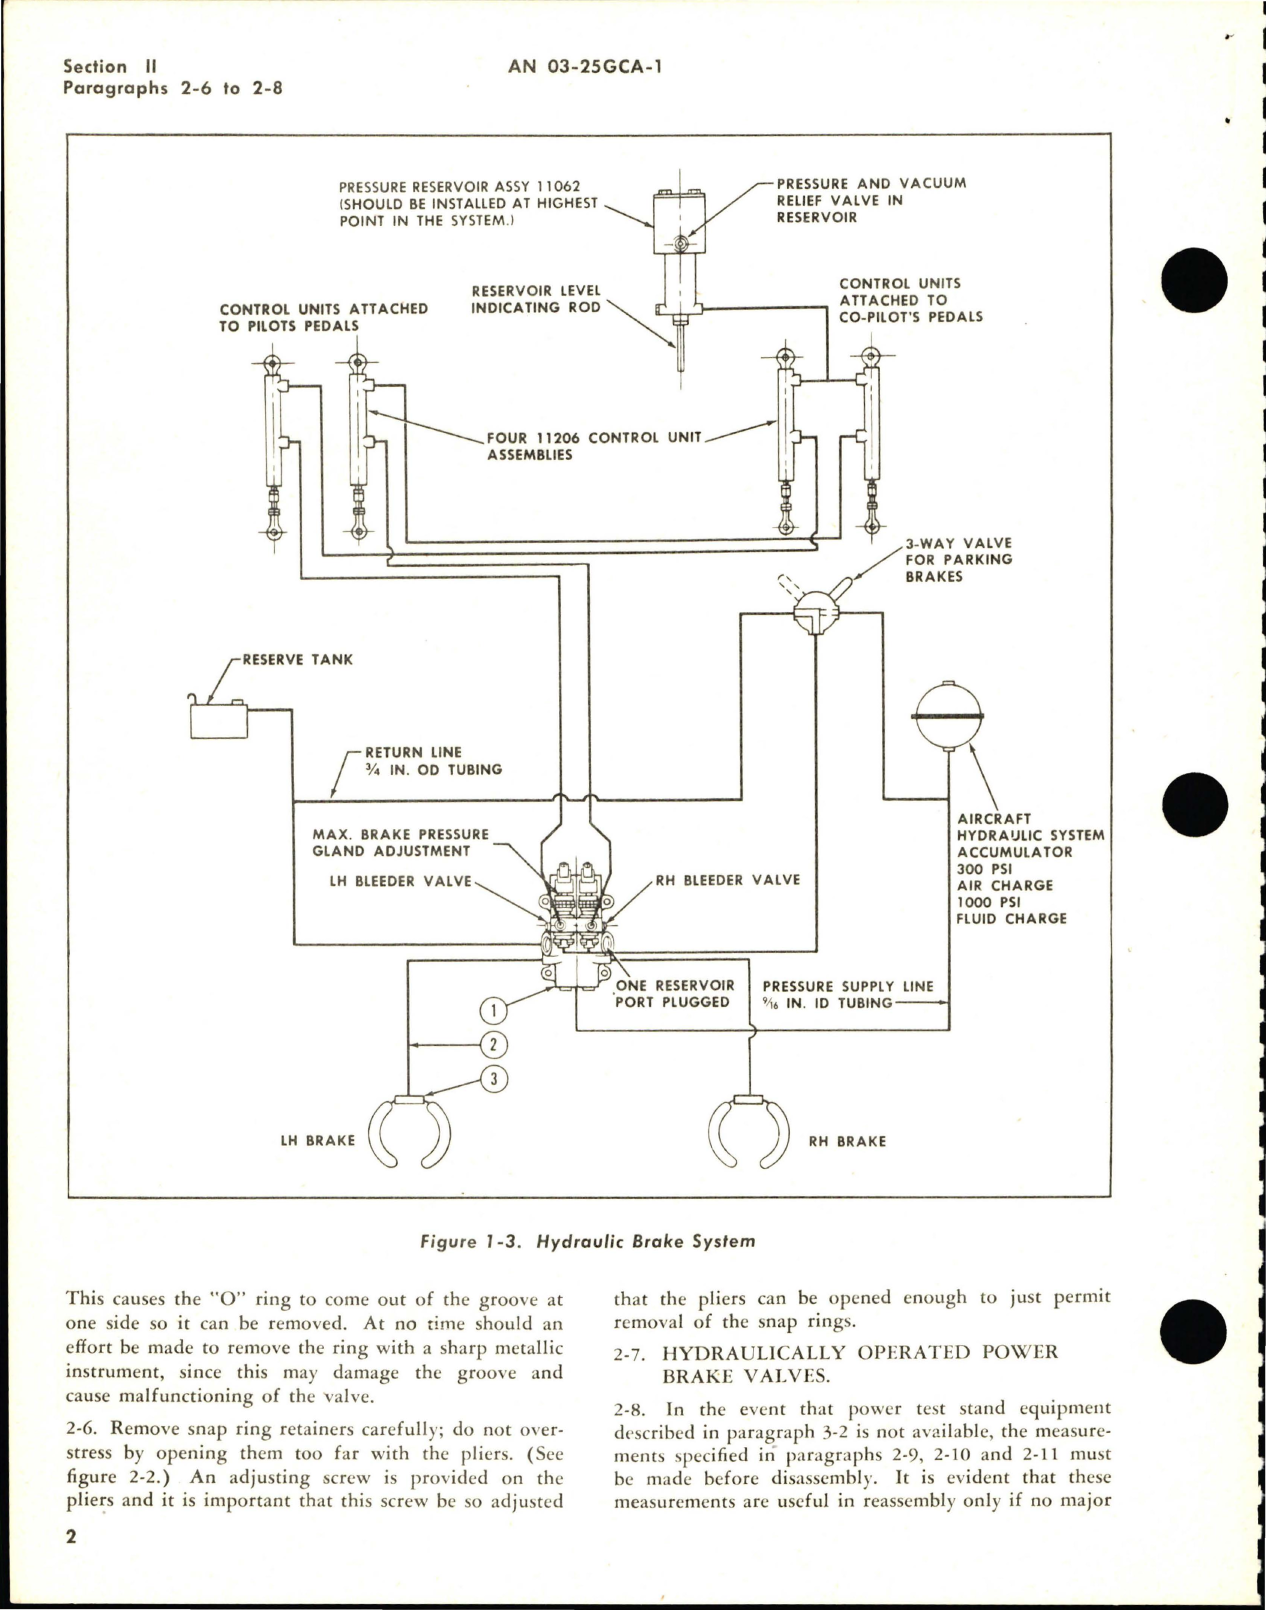 Sample page 6 from AirCorps Library document: Overhaul Instructions for Power Brake Valves - Hydraulic and Mechanical